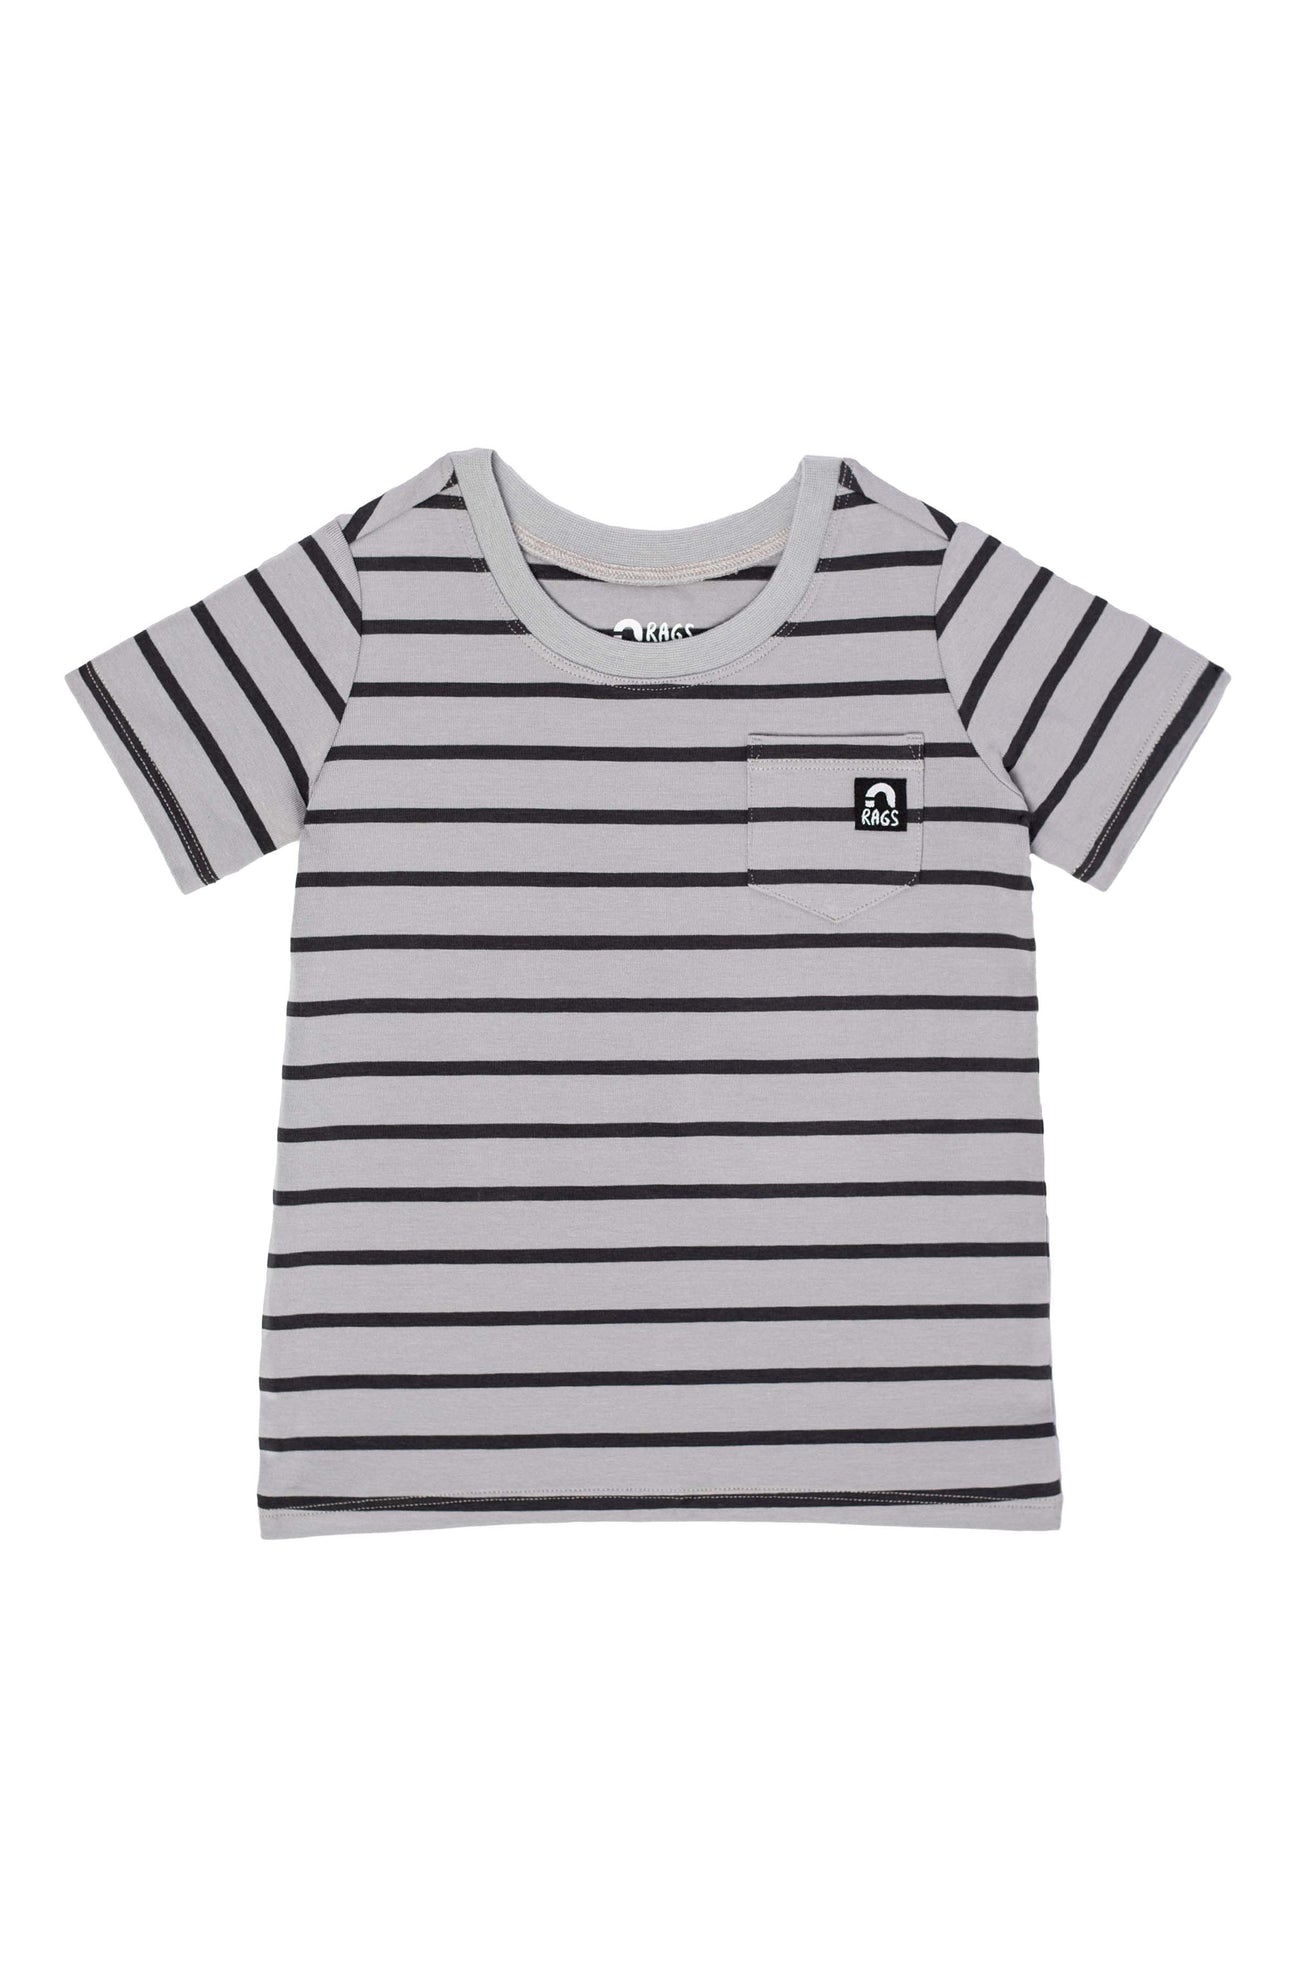 Essentials Short Sleeve Chest Pocket Rounded Tee - 'Quarry Stripe' TheT43Shop